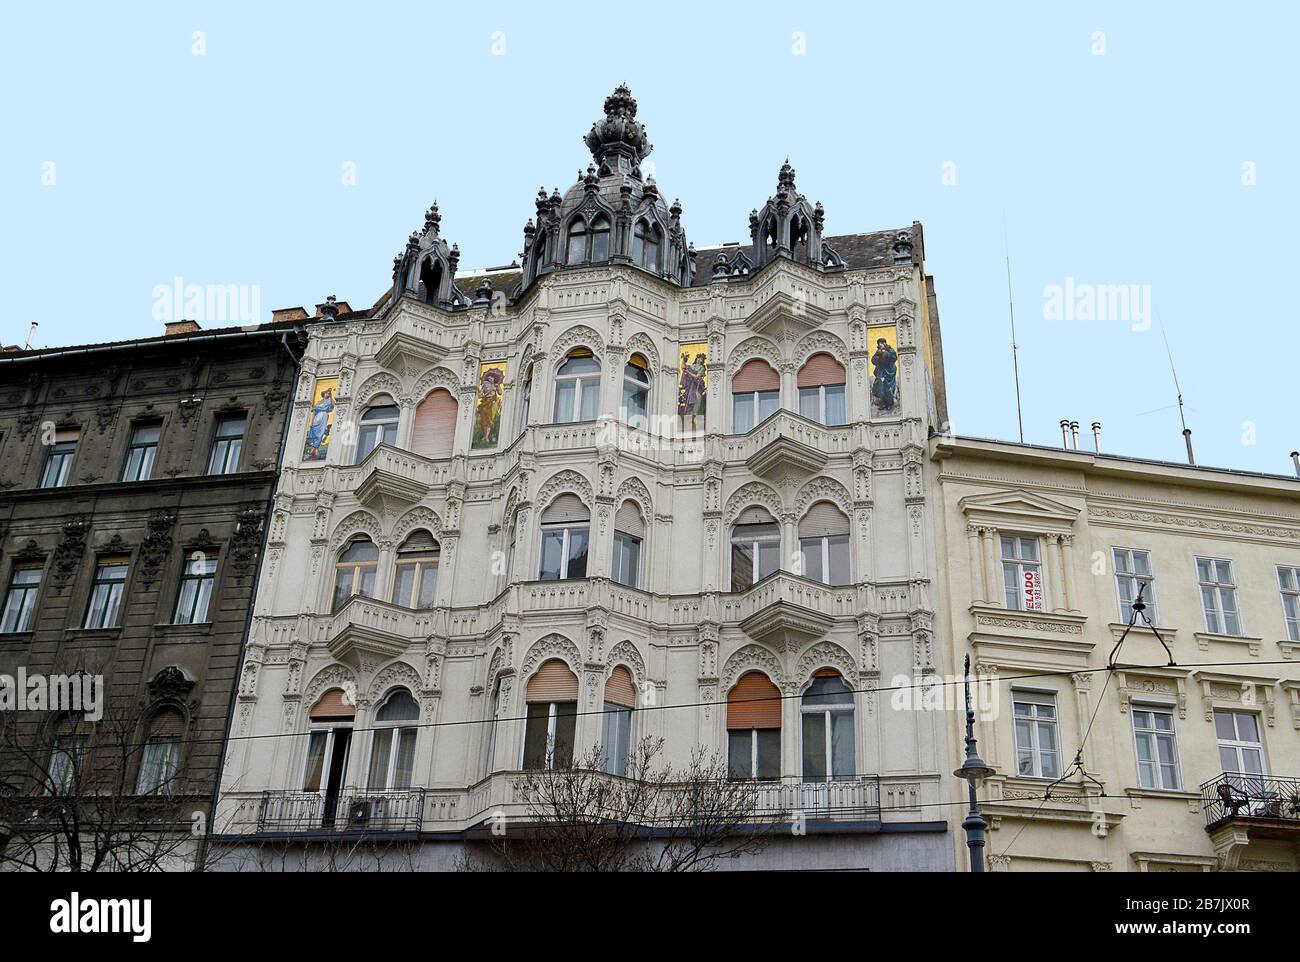 BUDAPEST, HUNGARY - 10 FEBRUARY 2020: The Severa House on Karoly Boulevard designed by Erno Schannen was built around 1900 and features four art nouve Stock Photo